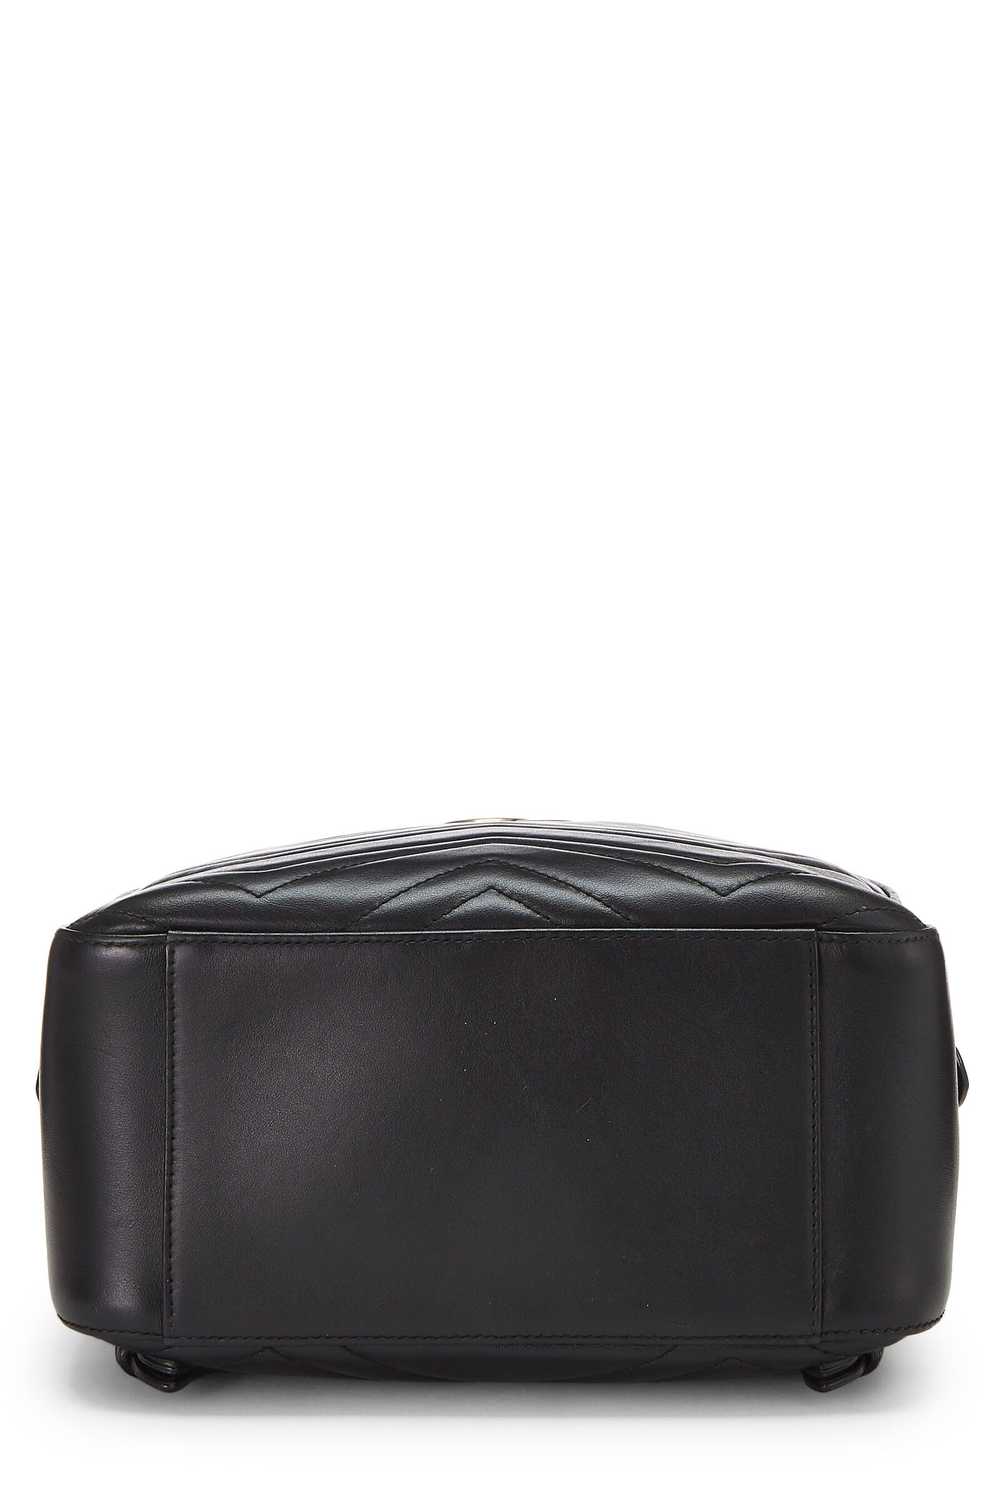 Black Leather Marmont Backpack - image 6